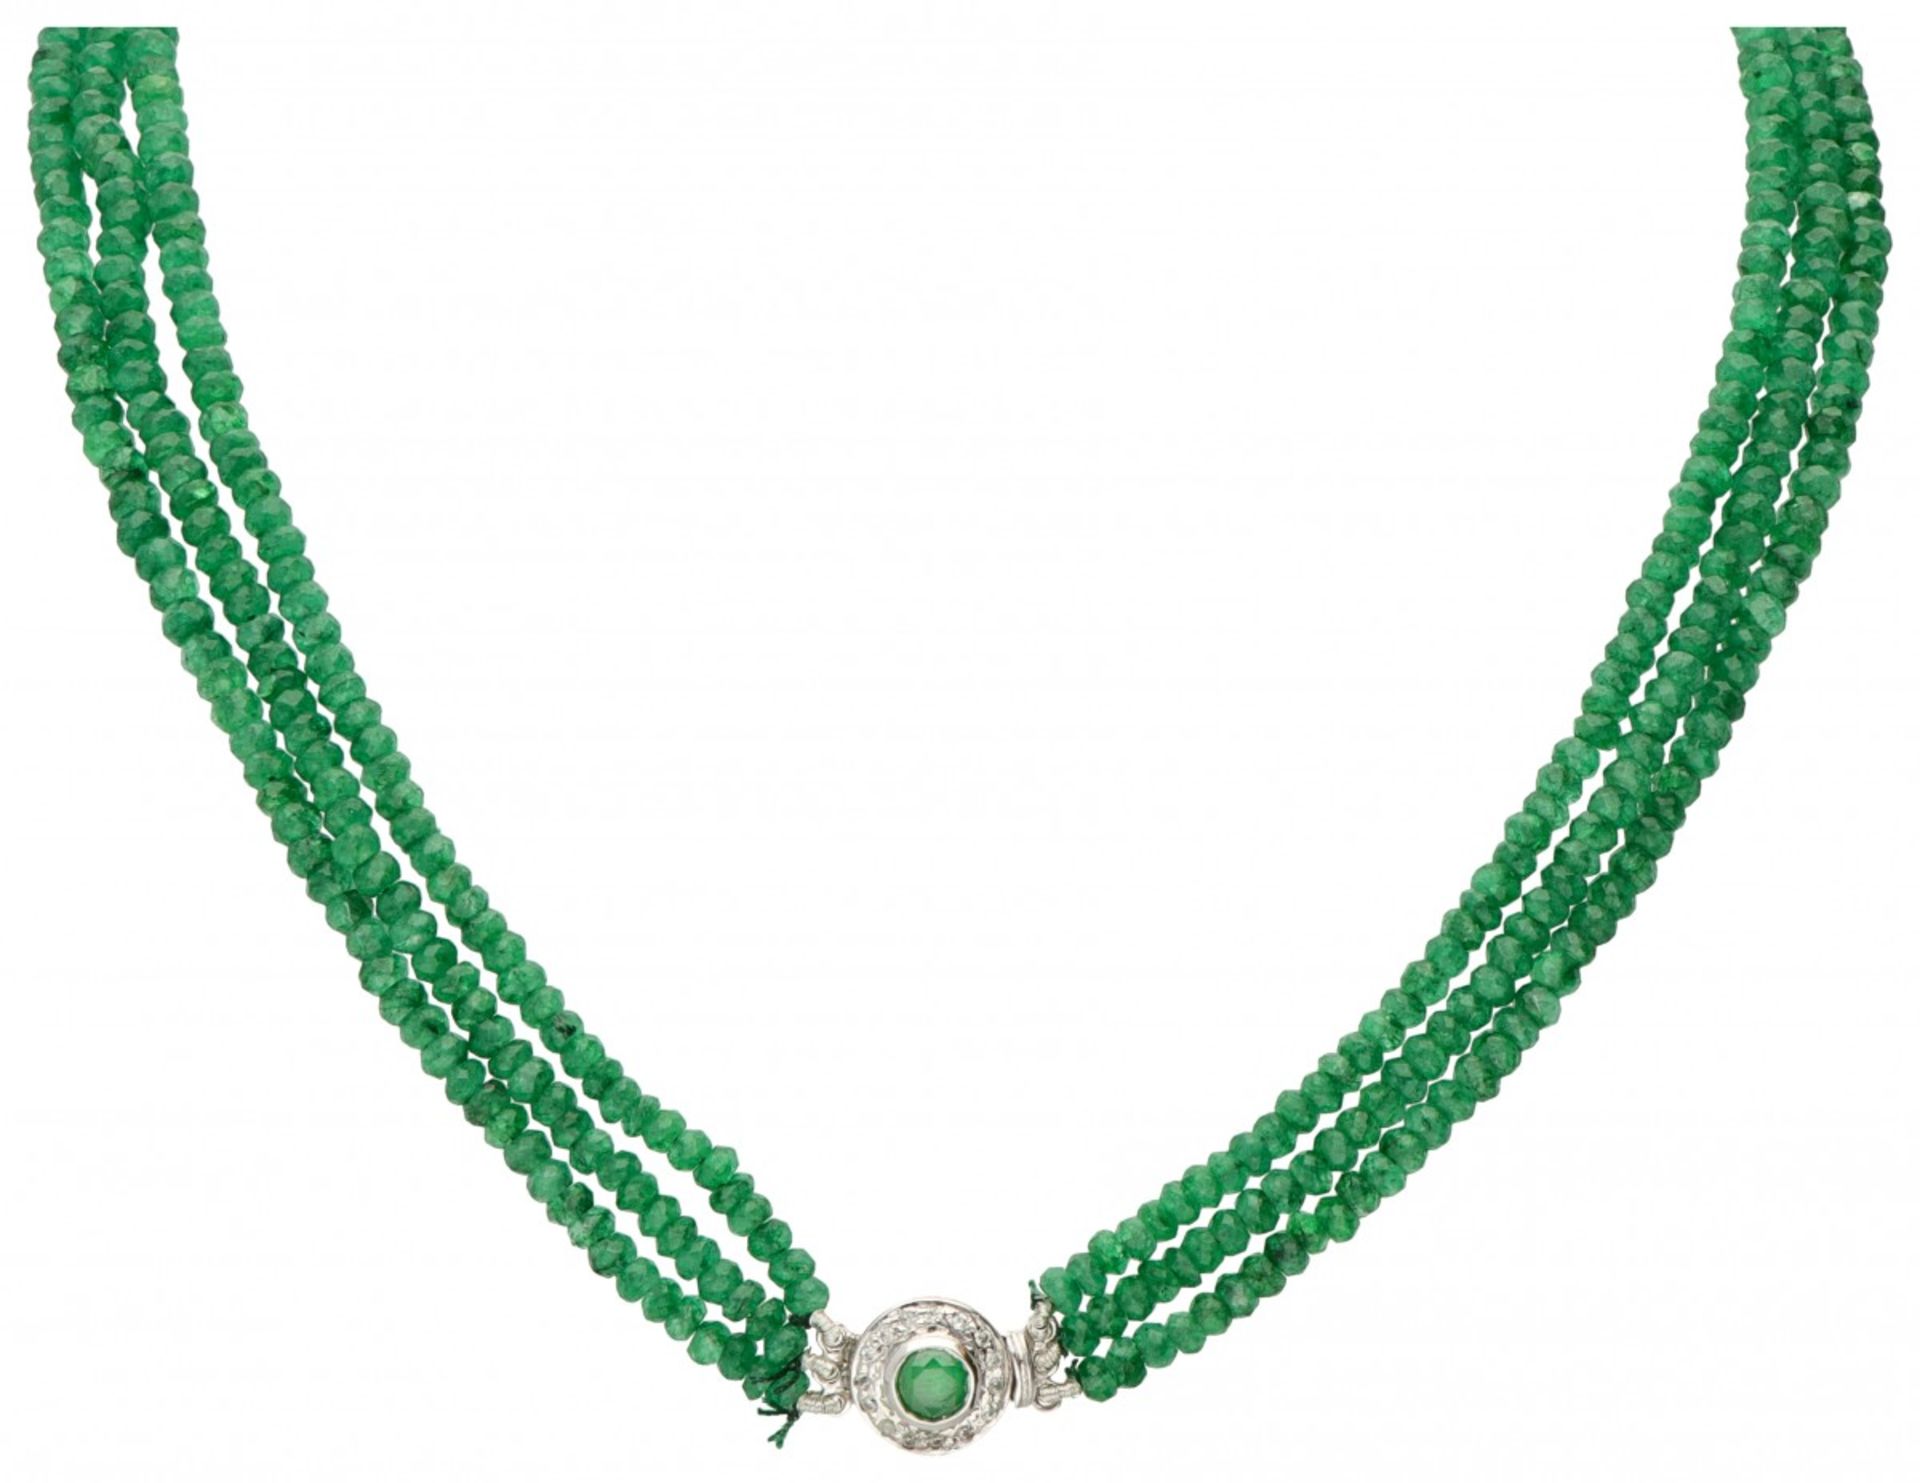 Three-row necklace with a BLA silver closure, completely set with green quartz.